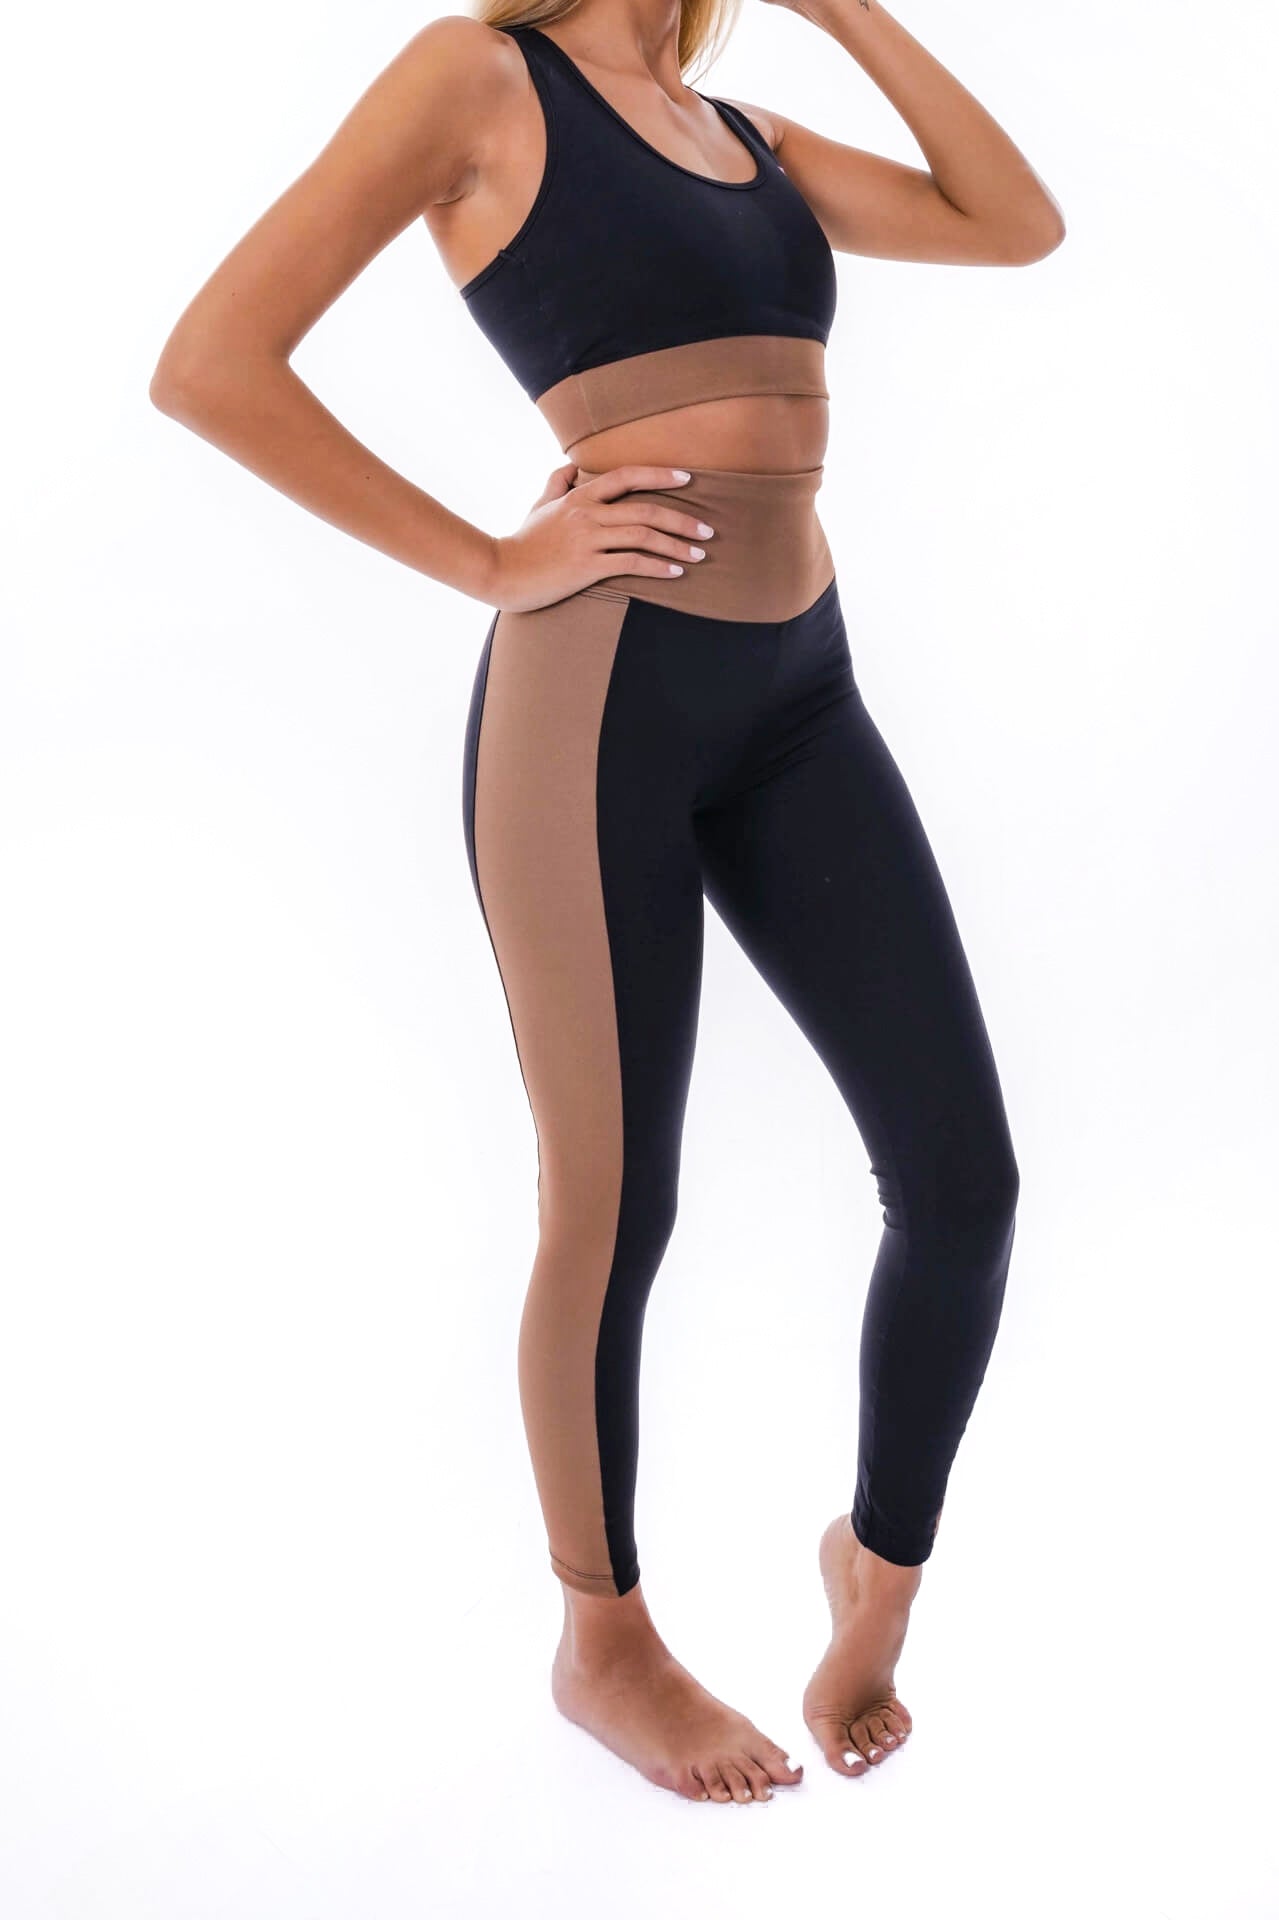 Leggings risca lateral - Bege